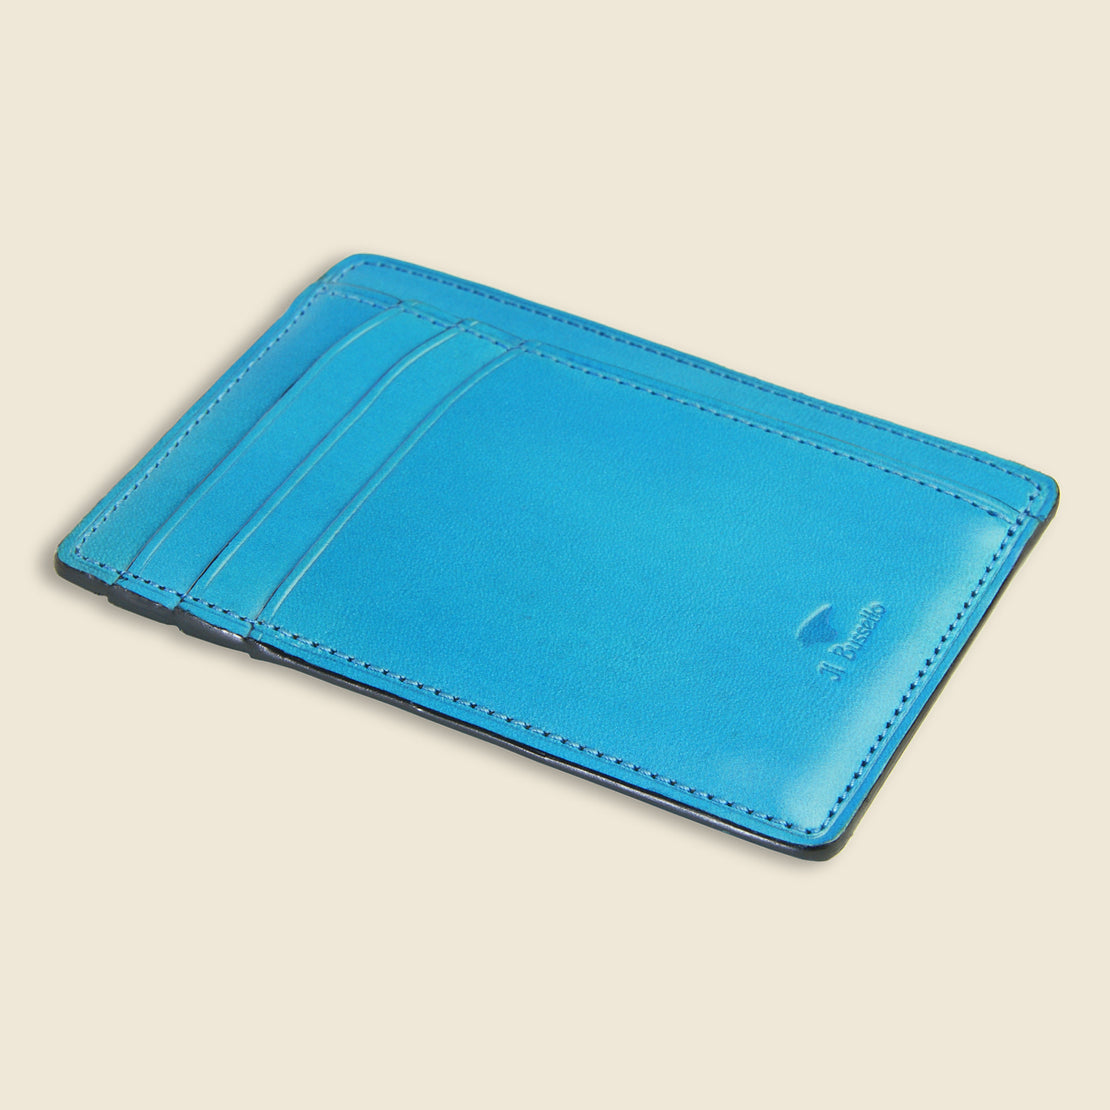 Card and Document Case - Cadet Blue - Il Bussetto - STAG Provisions - Accessories - Wallets